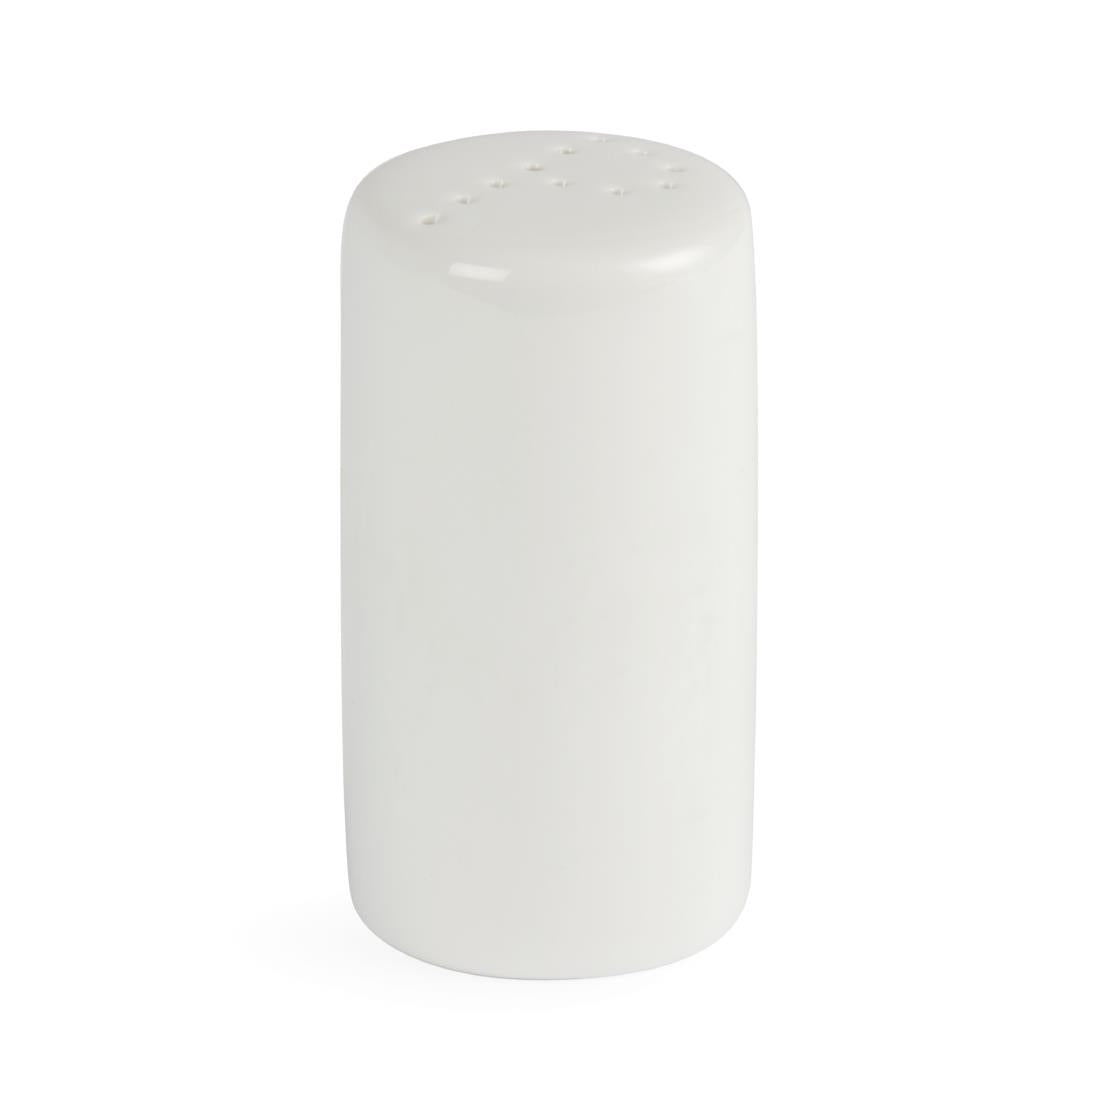 CB703 Olympia Whiteware Pepper Shakers 80mm (Pack of 12)